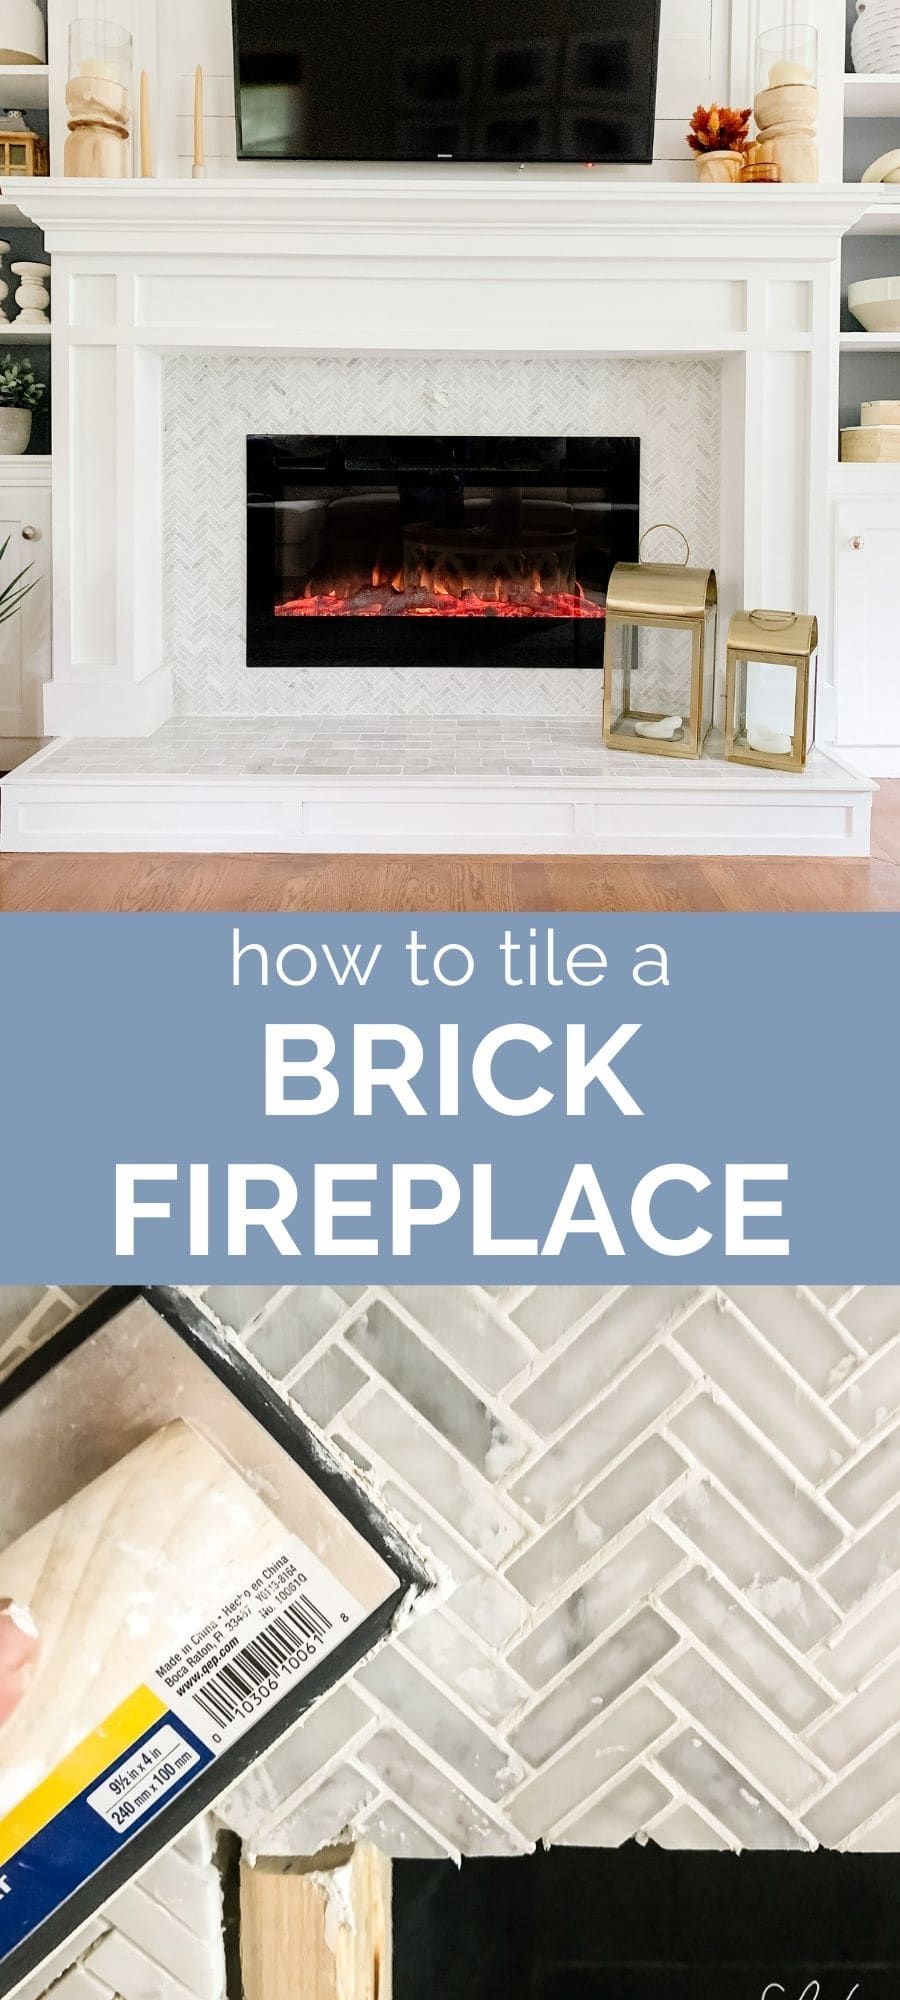 How To Tile A Brick Fireplace Jenna, How To Replace Tile Fireplace With Stone Wall